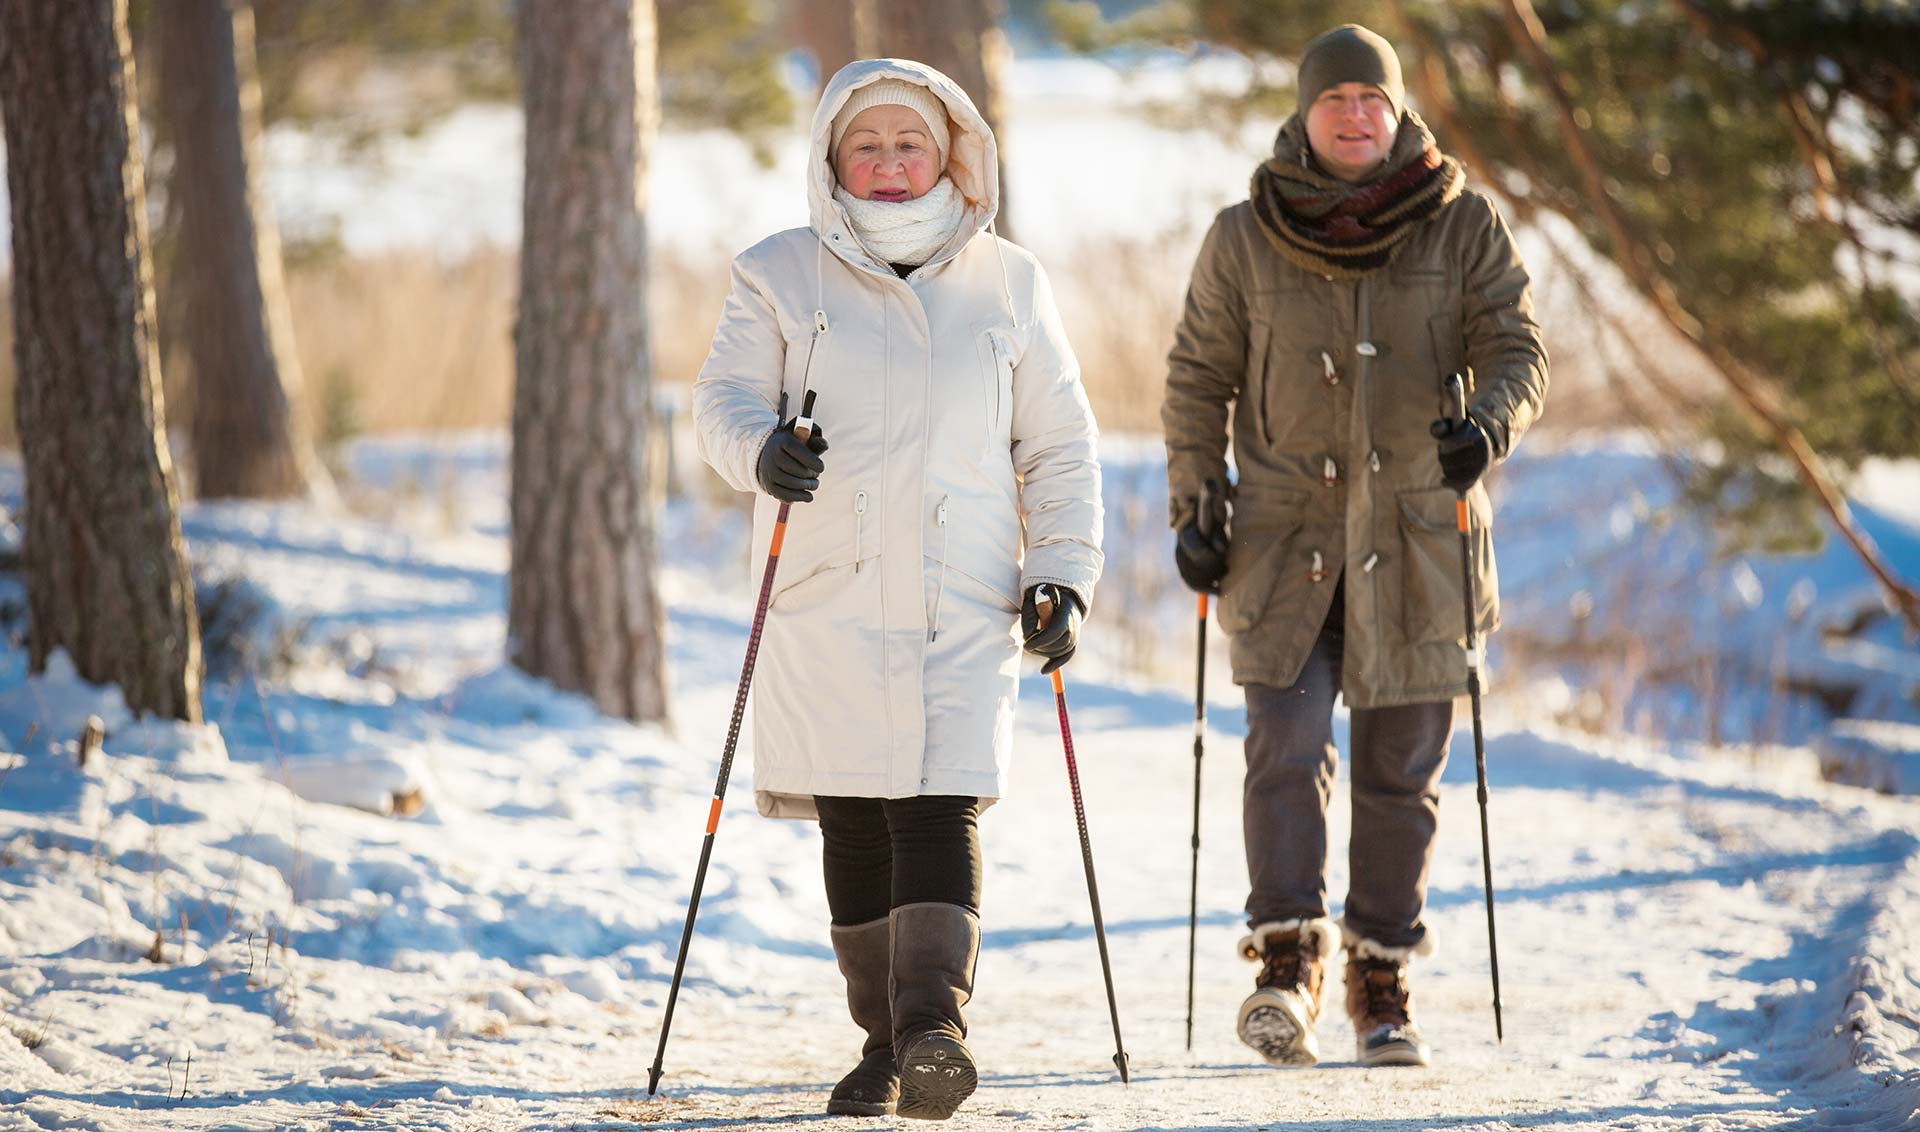 A senior couple is walking on a snowy path, it is a sunny winter day. They are using Nordic poles and are well bundled against the cold.